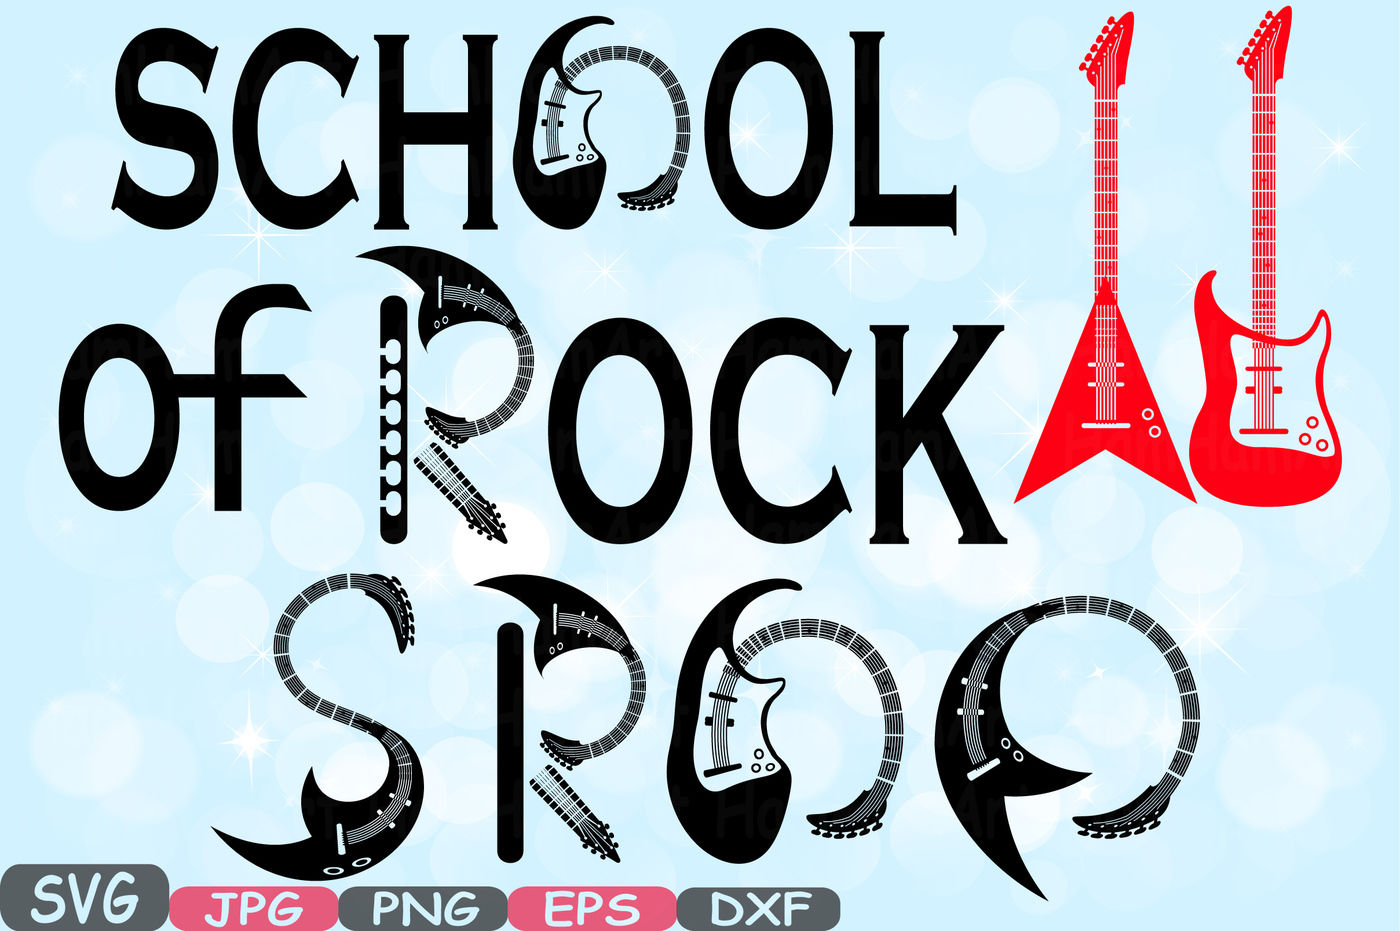 ori 65618 8d52451c540452bebfb54d8f2d9bbca25af8e42b school of rock cutting files svg clipart silhouette welcome long live rock and roll heavy metal vinyl eps png music vector 659s